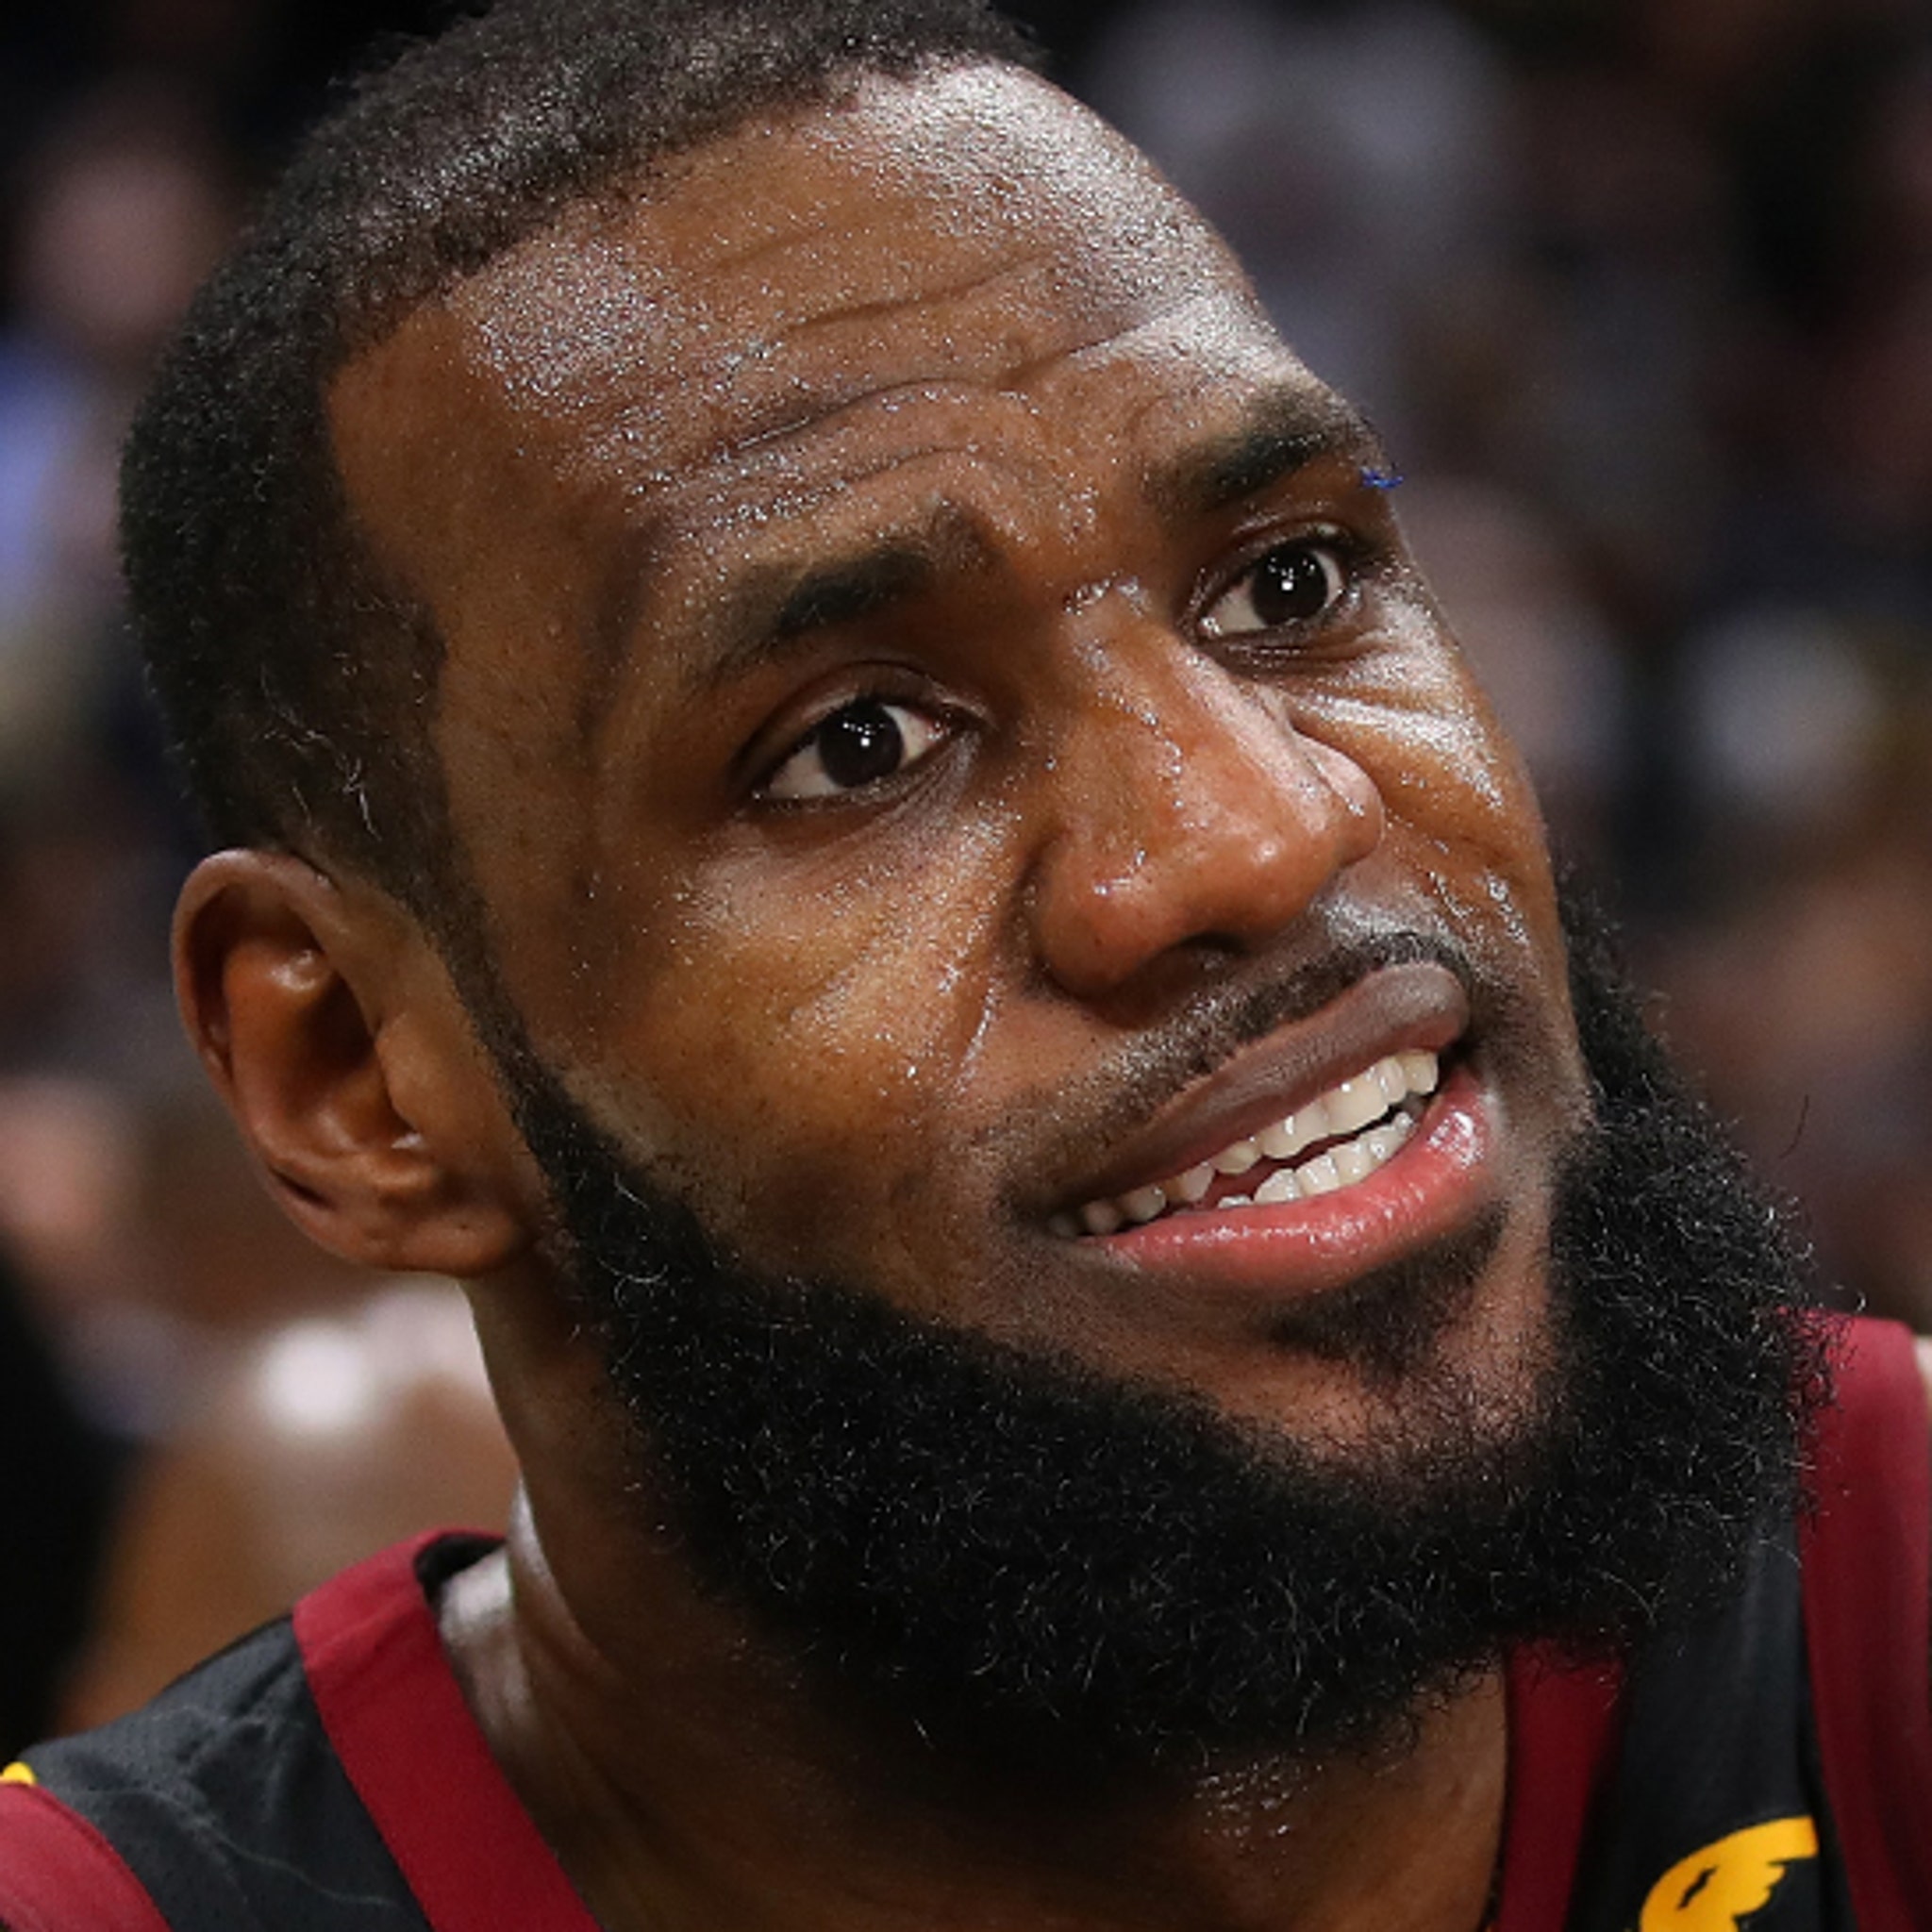 LeBron James agrees to four-year, $154-million contract with Los